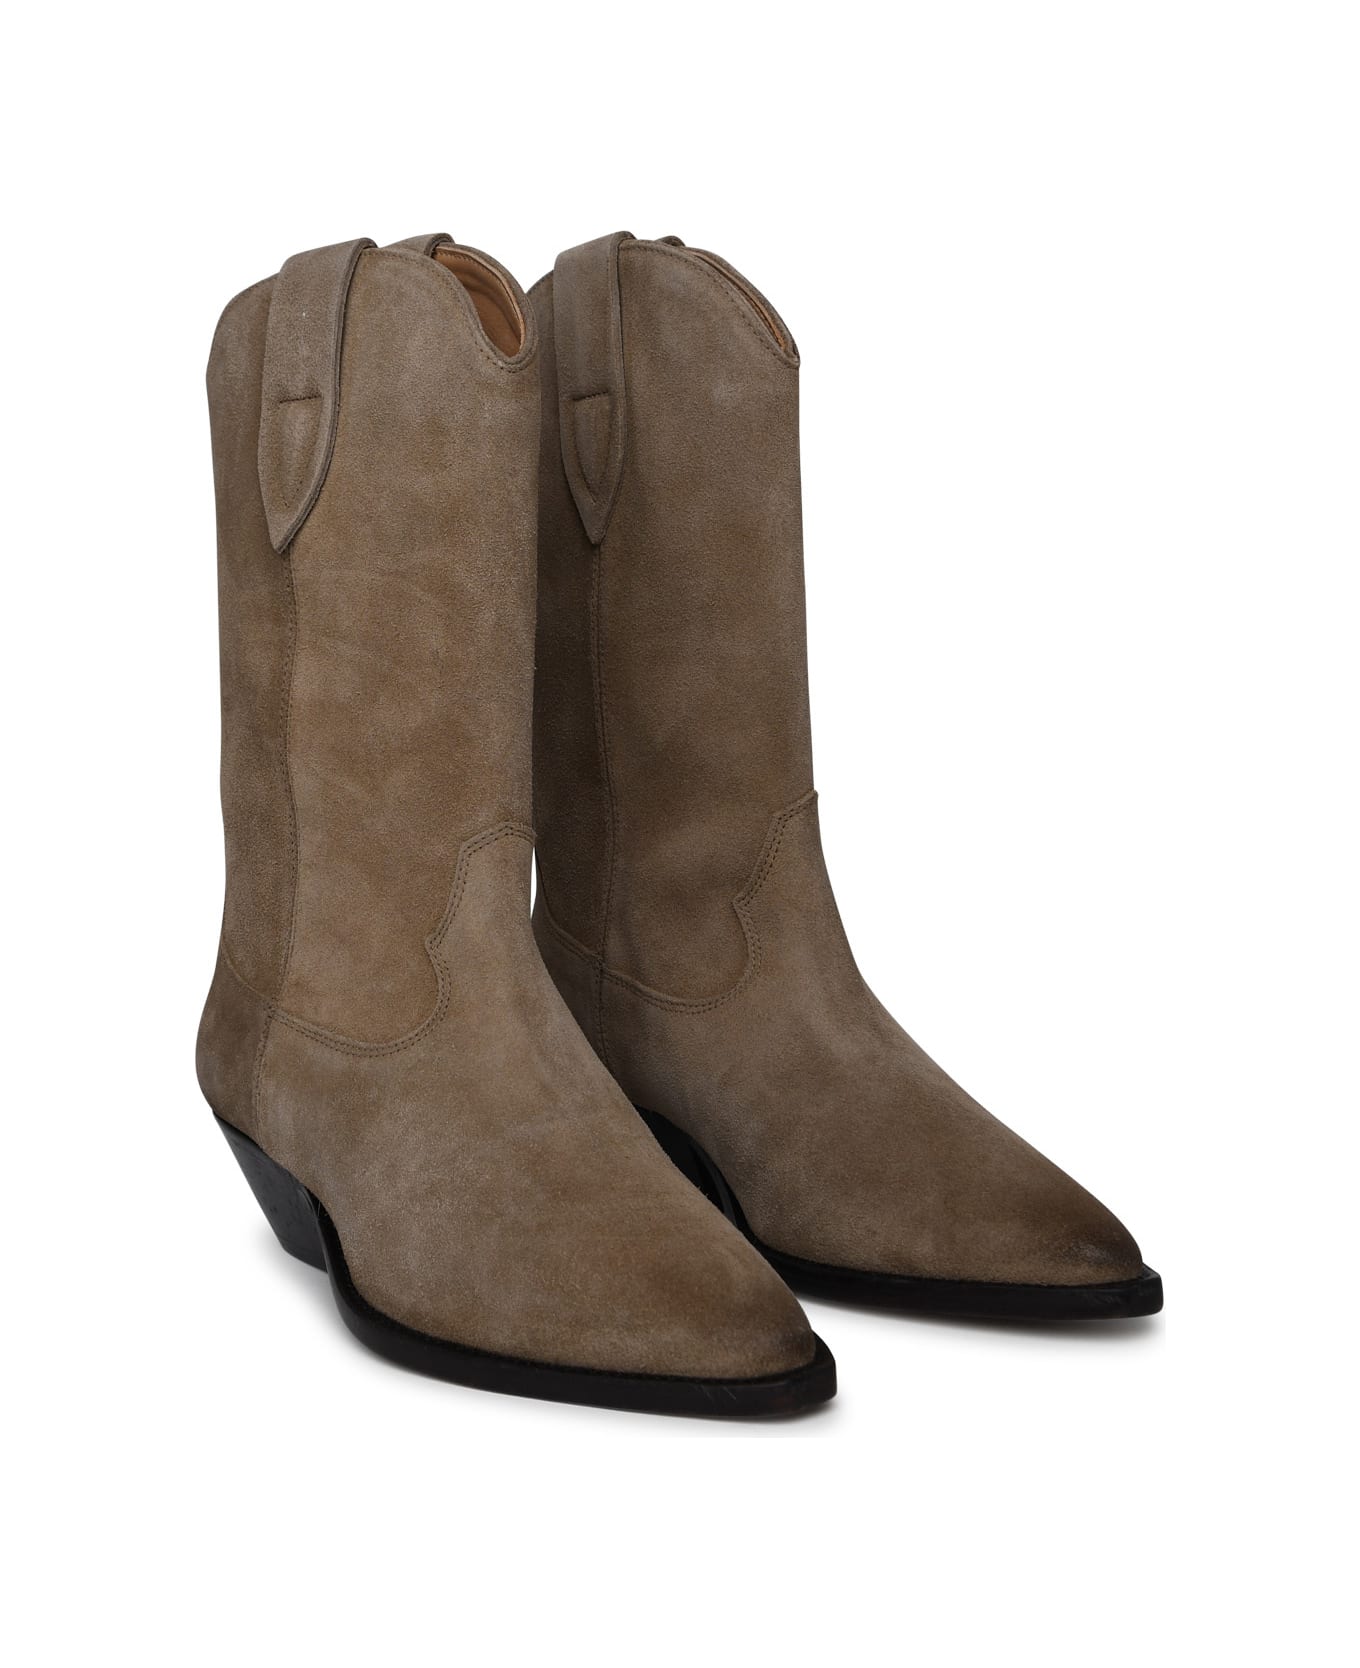 Isabel Marant Duerto Cowboy Boots - Taupe ブーツ